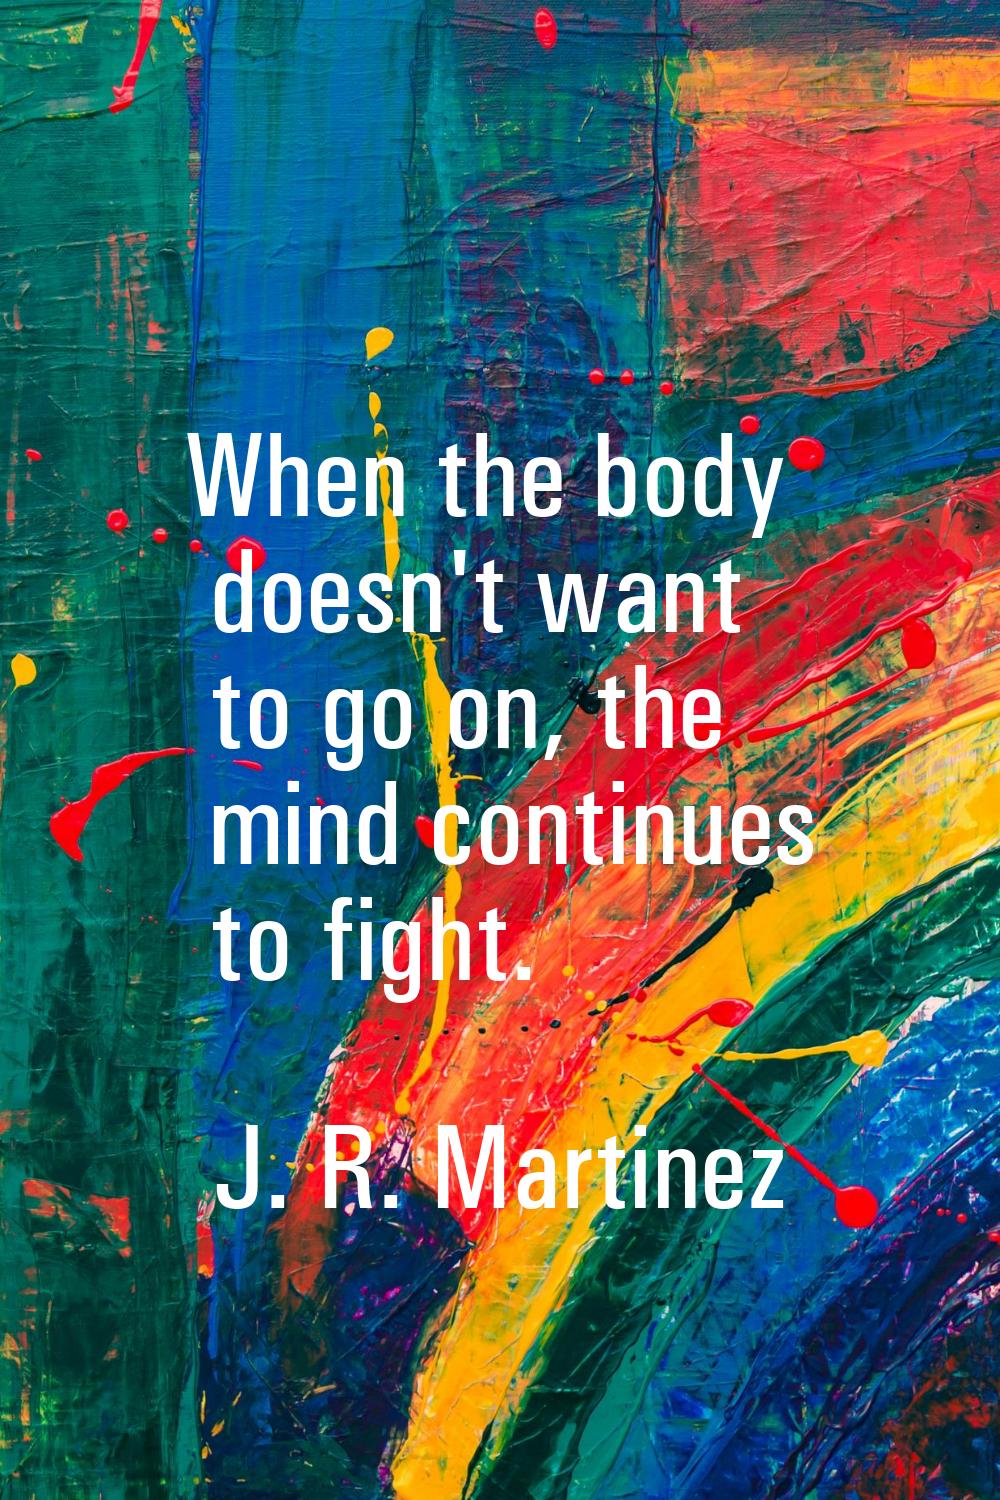 When the body doesn't want to go on, the mind continues to fight.